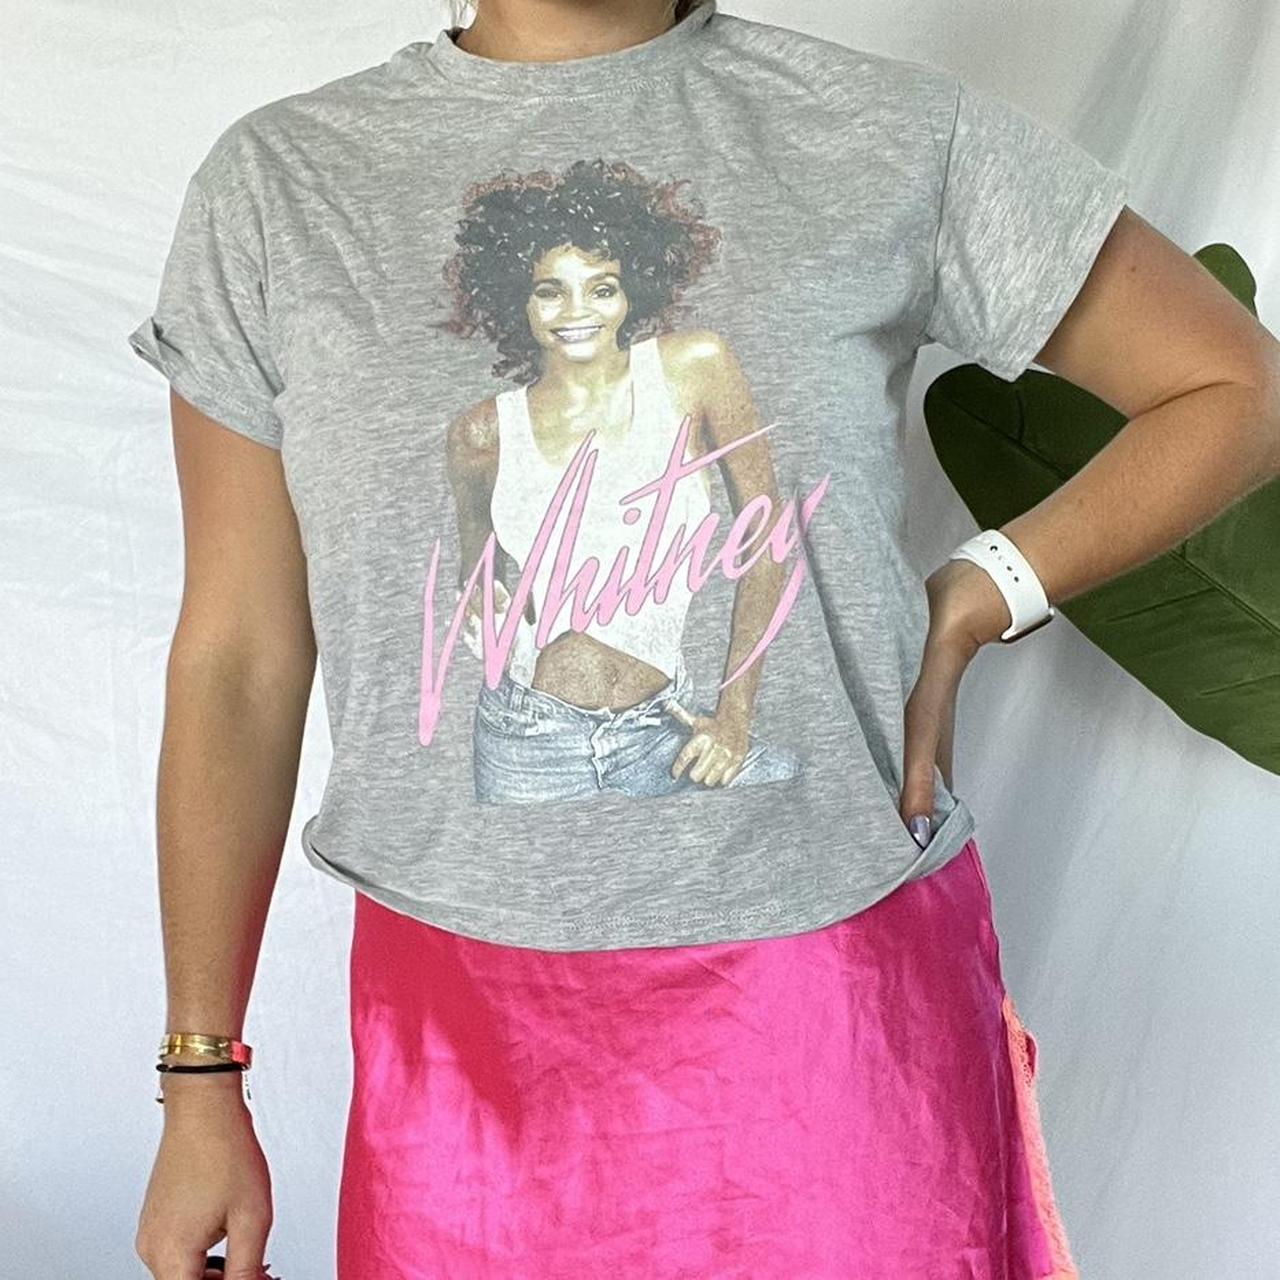 Product Image 1 - #Relaxed Whitney Houston #top

#grey XL